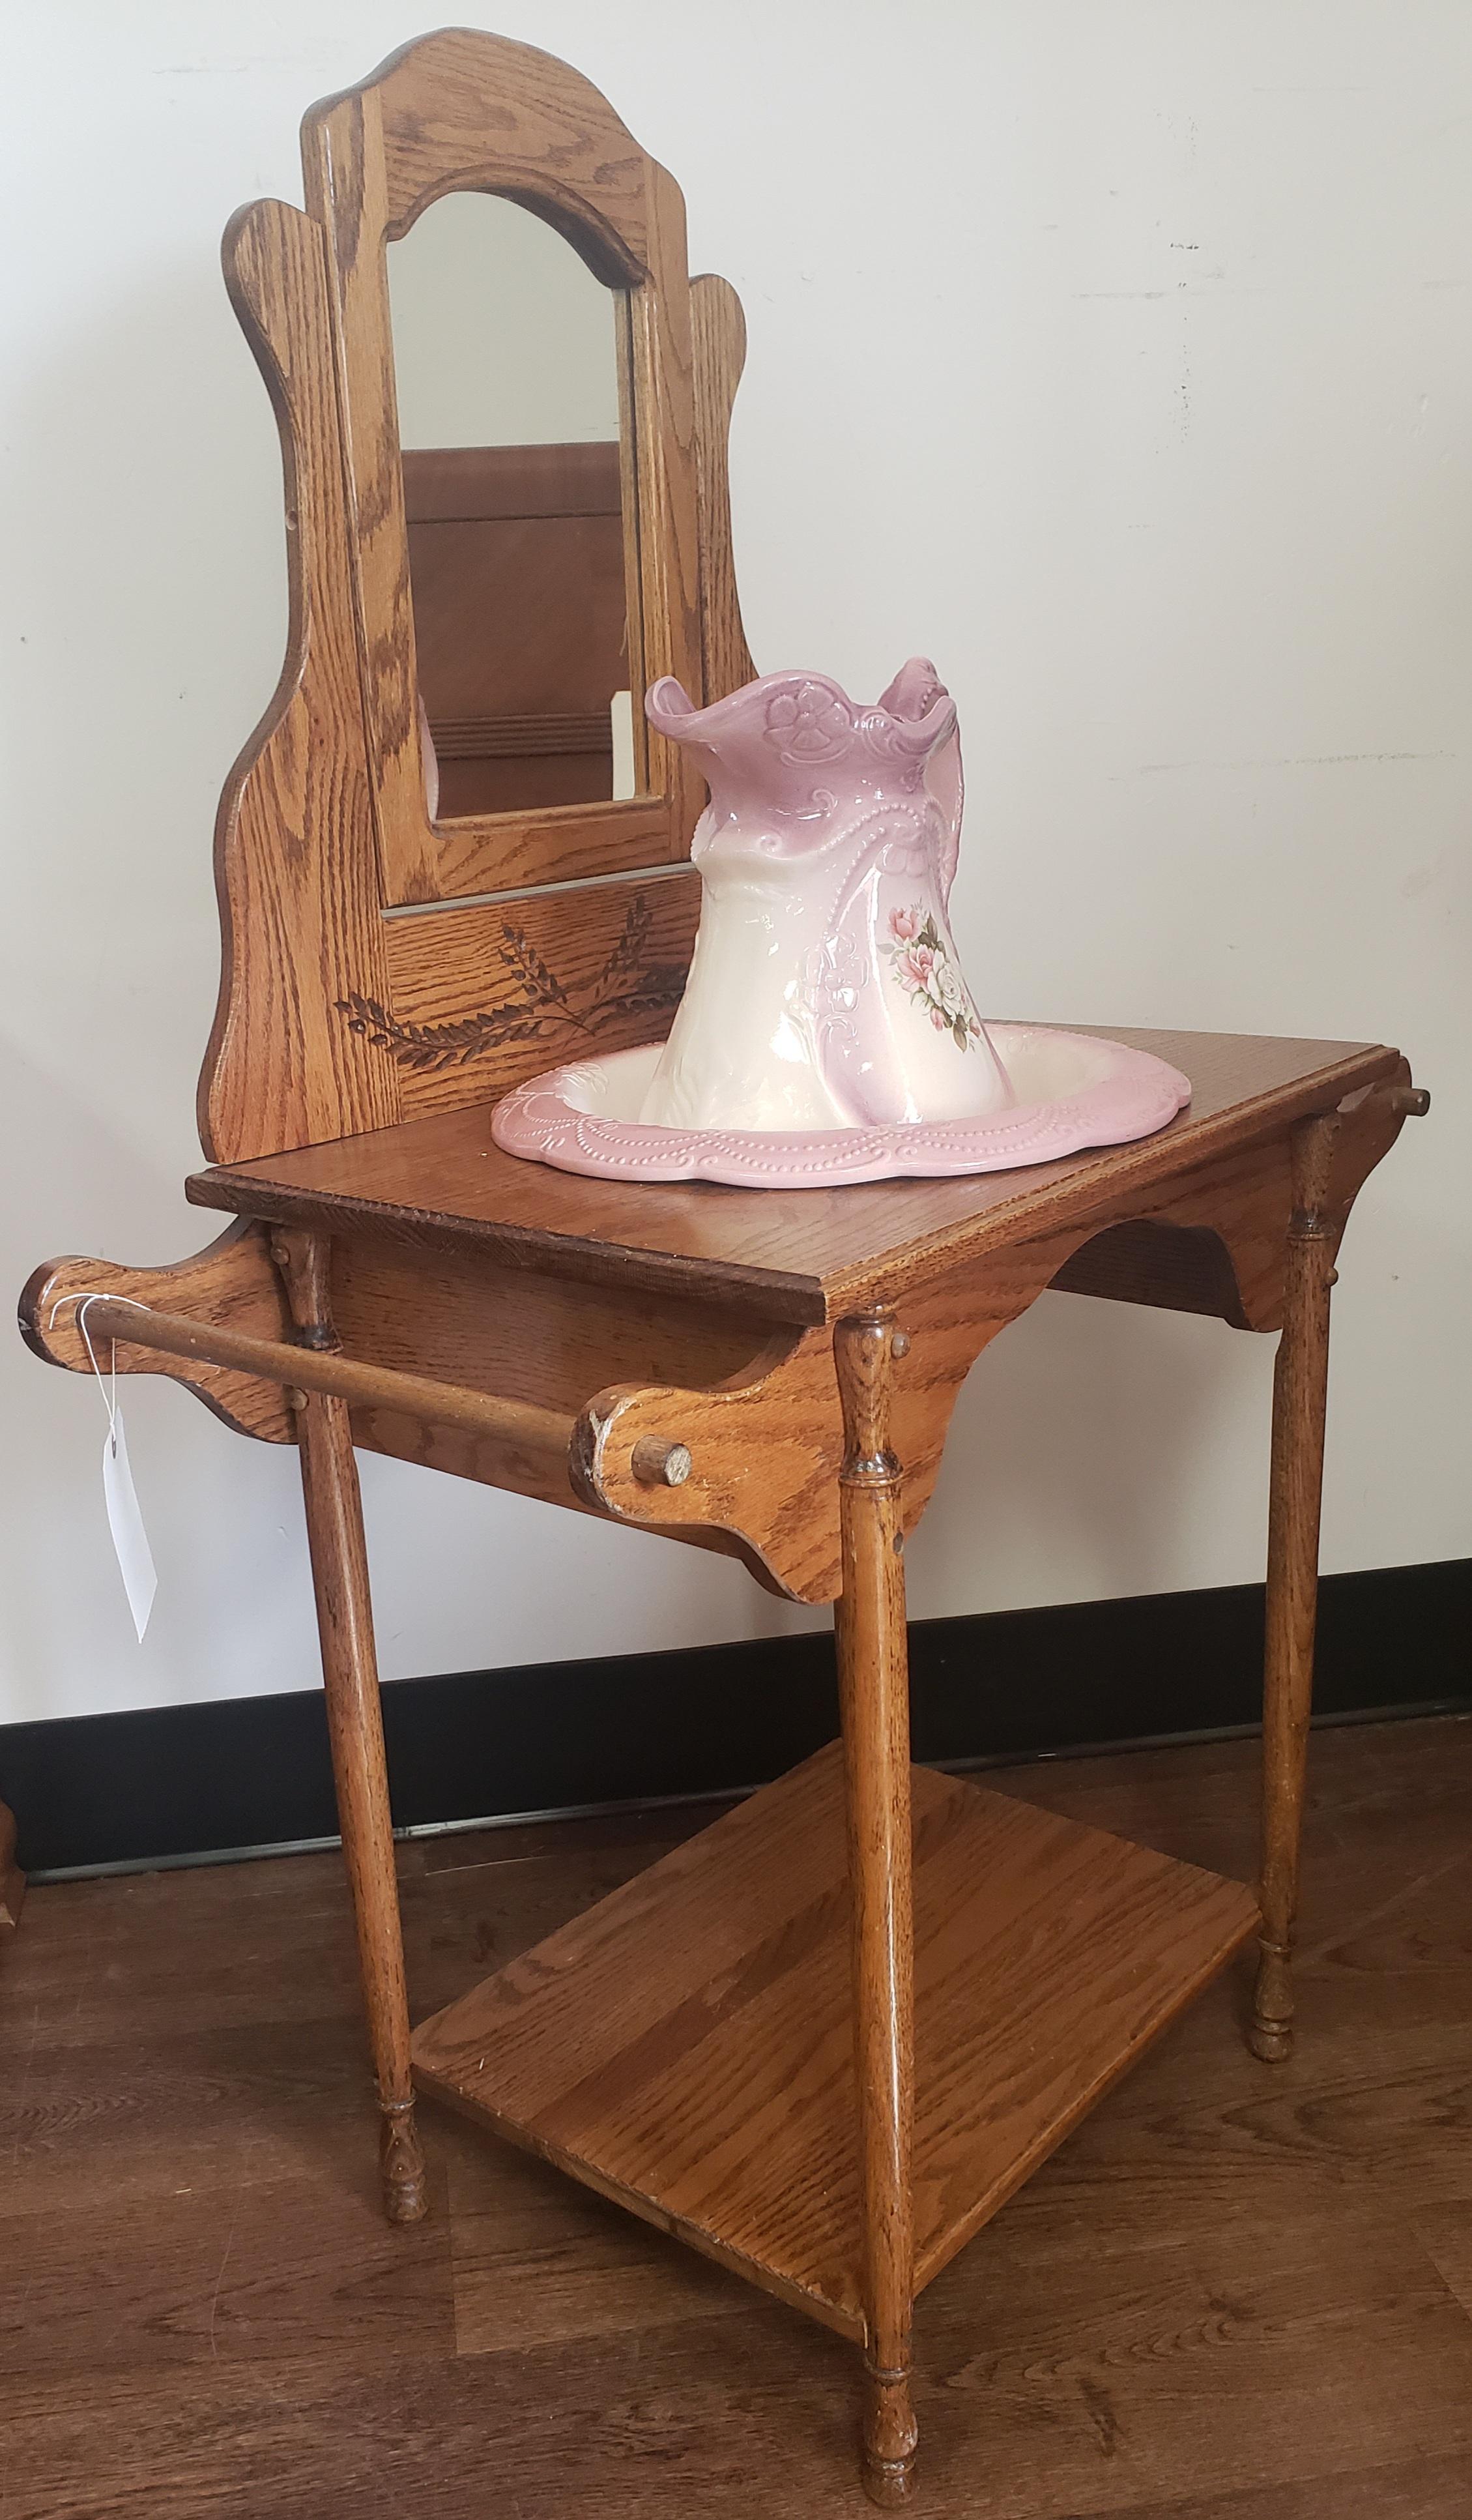 1890 English ironstone basin and pitcher on mirrored oak washstand in very good condition. Mirror seems to have been replaces and is in good condition. Measures 33.5